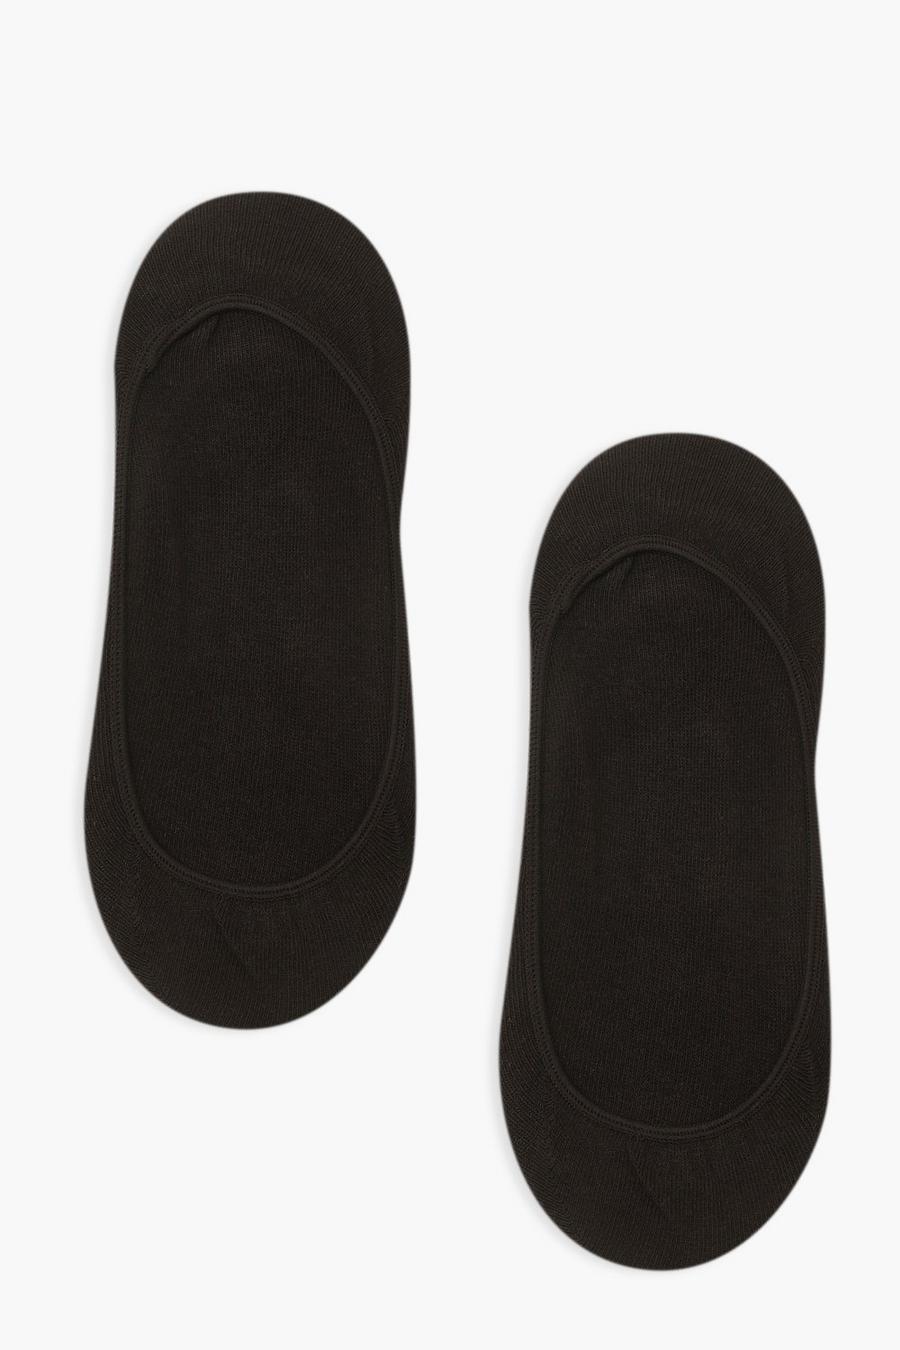 Pack invisible de 2 calcetines, Negro image number 1